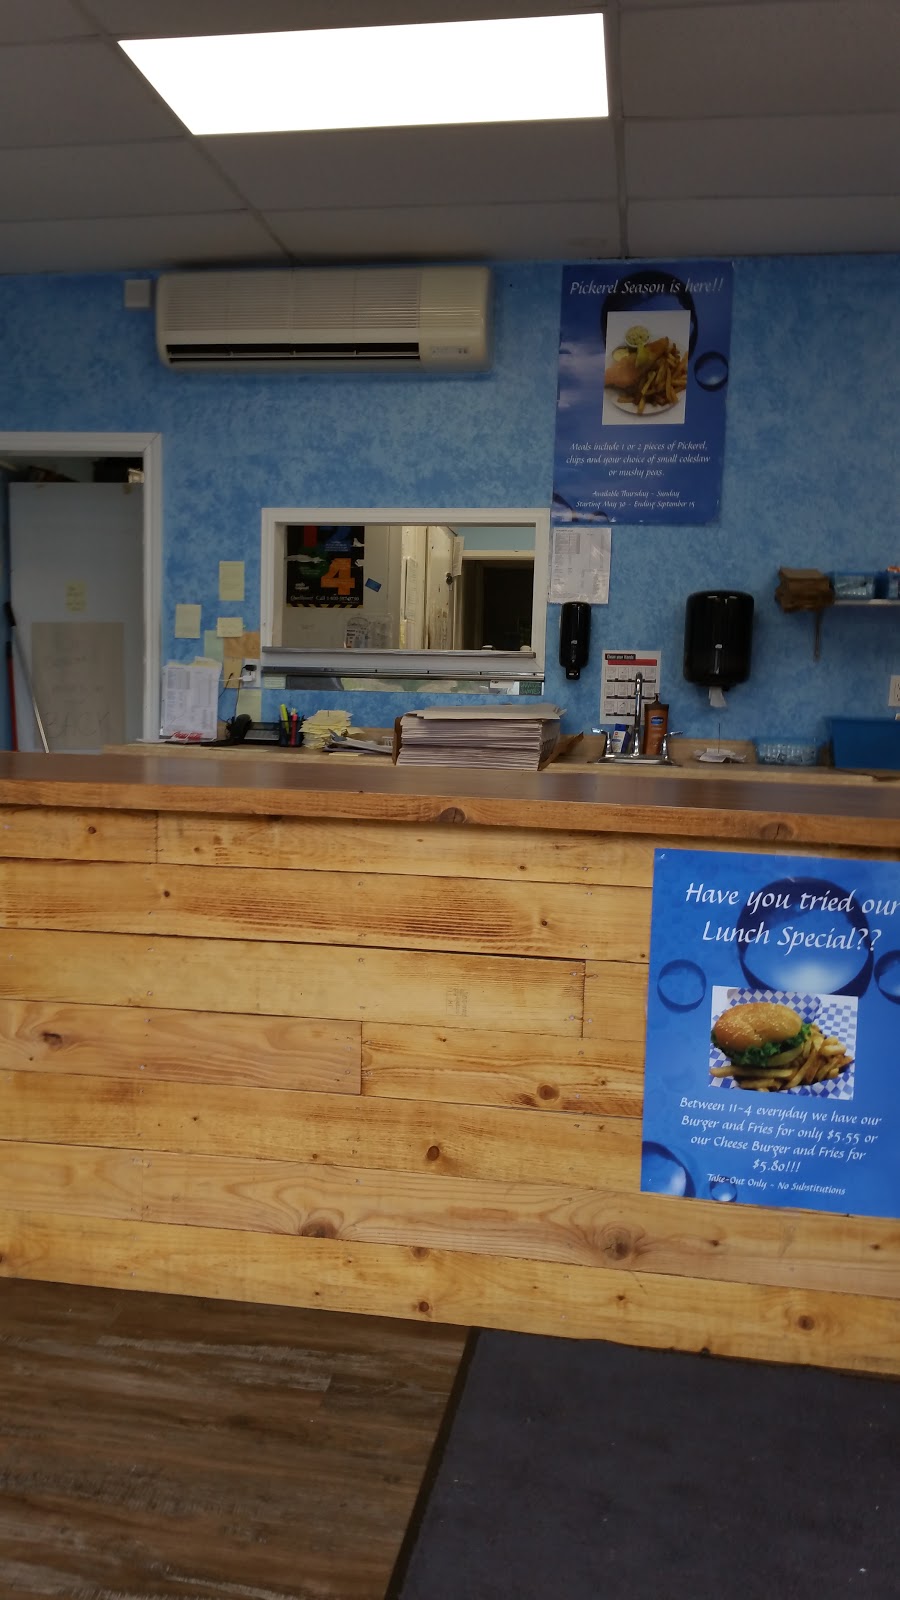 Beamsville Fish And Chips | 397 Thorold Rd, Welland, ON L3C 3W4, Canada | Phone: (905) 732-9444